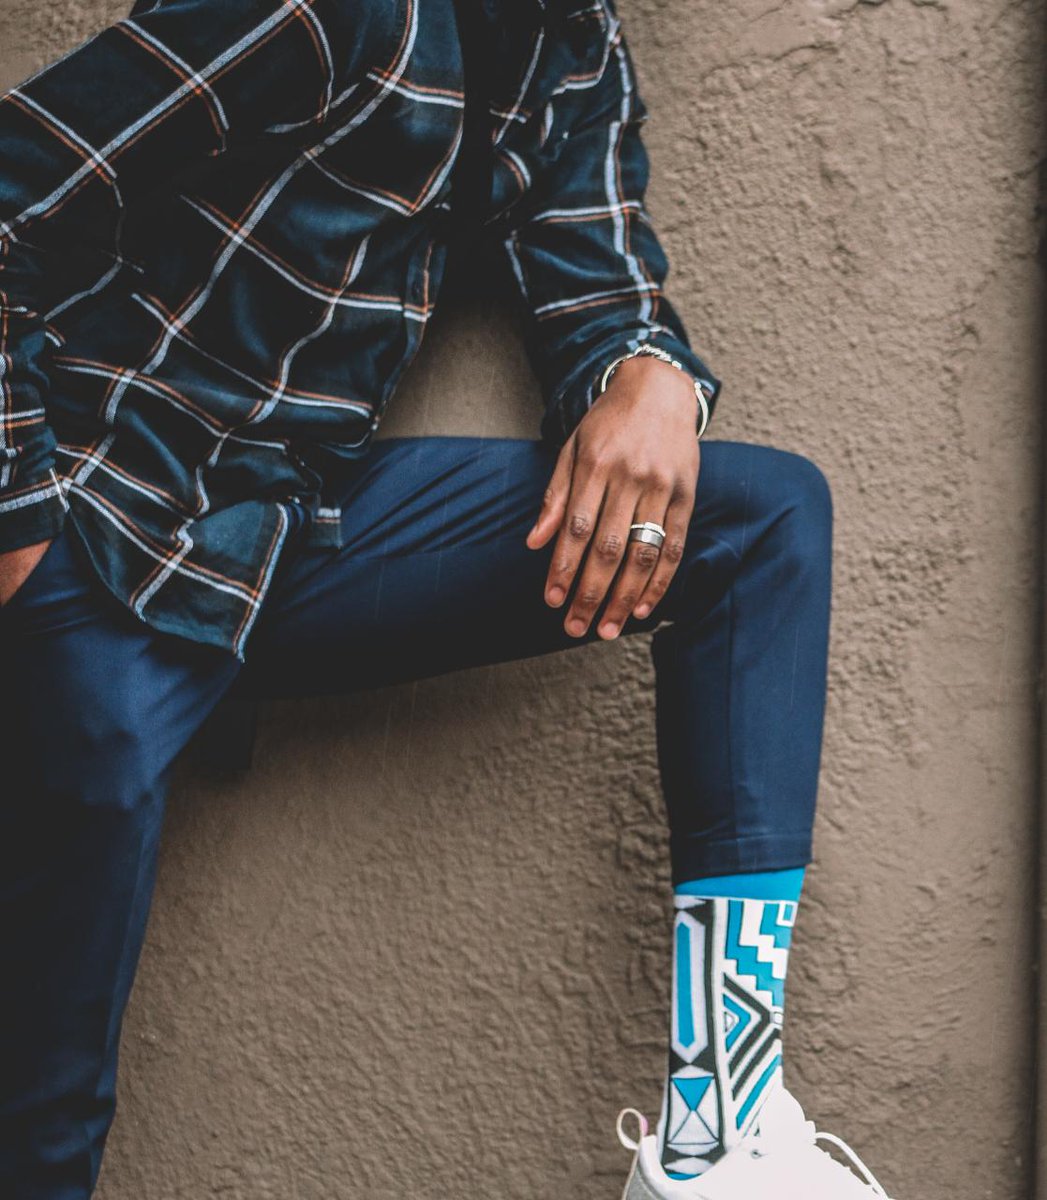 The intricate design and vibrant colors make these socks a true work of art. Highly recommend checking them out! #XhosaSocks #SouthAfricanDesign #Fashion #Style